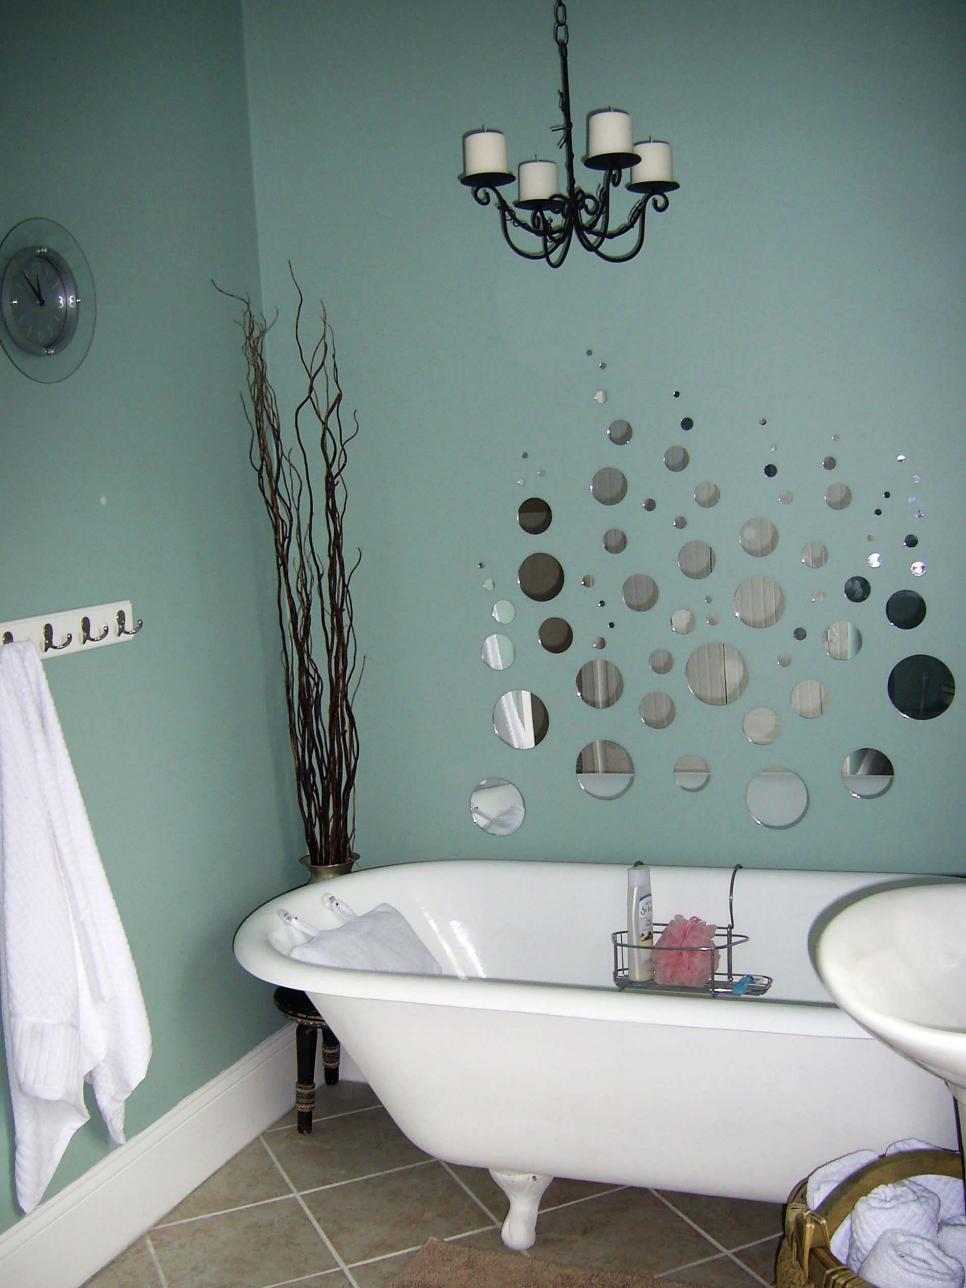 Bathrooms On A Budget Our 10 Favorites From Rate My Space Diy